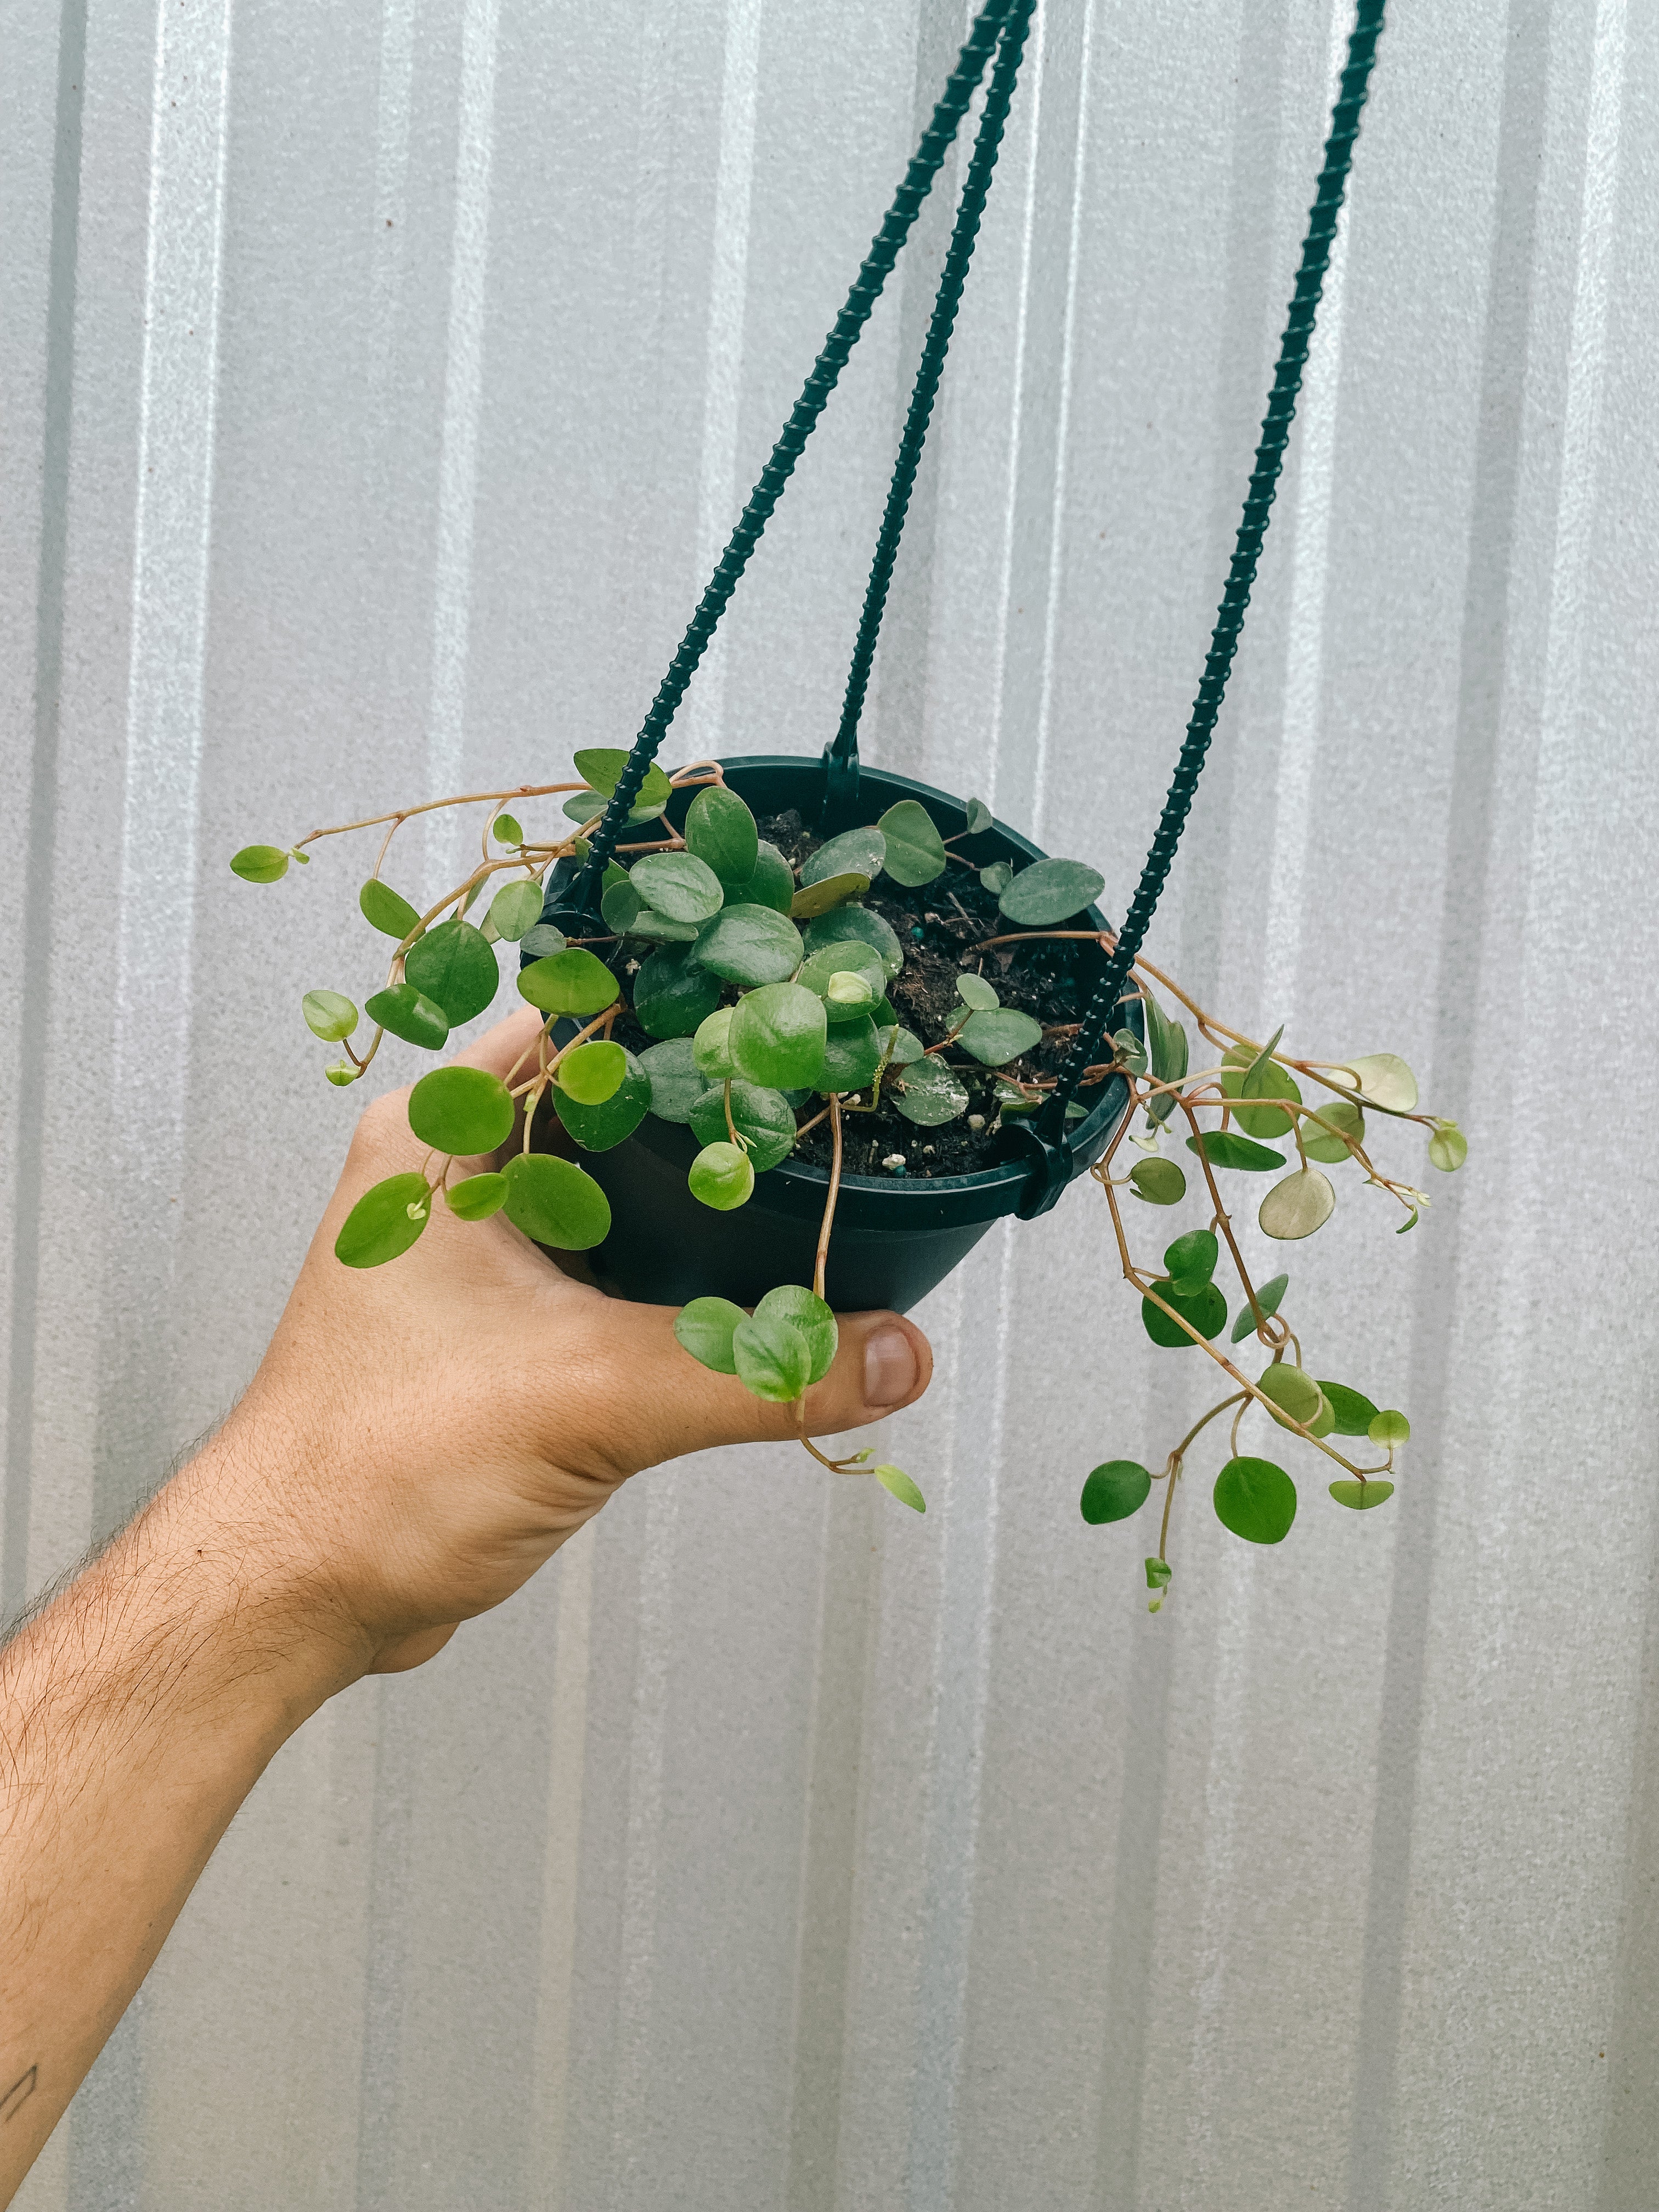 4" Peperomia 'Pepperspot' "String of Coins" (Hanging Basket)